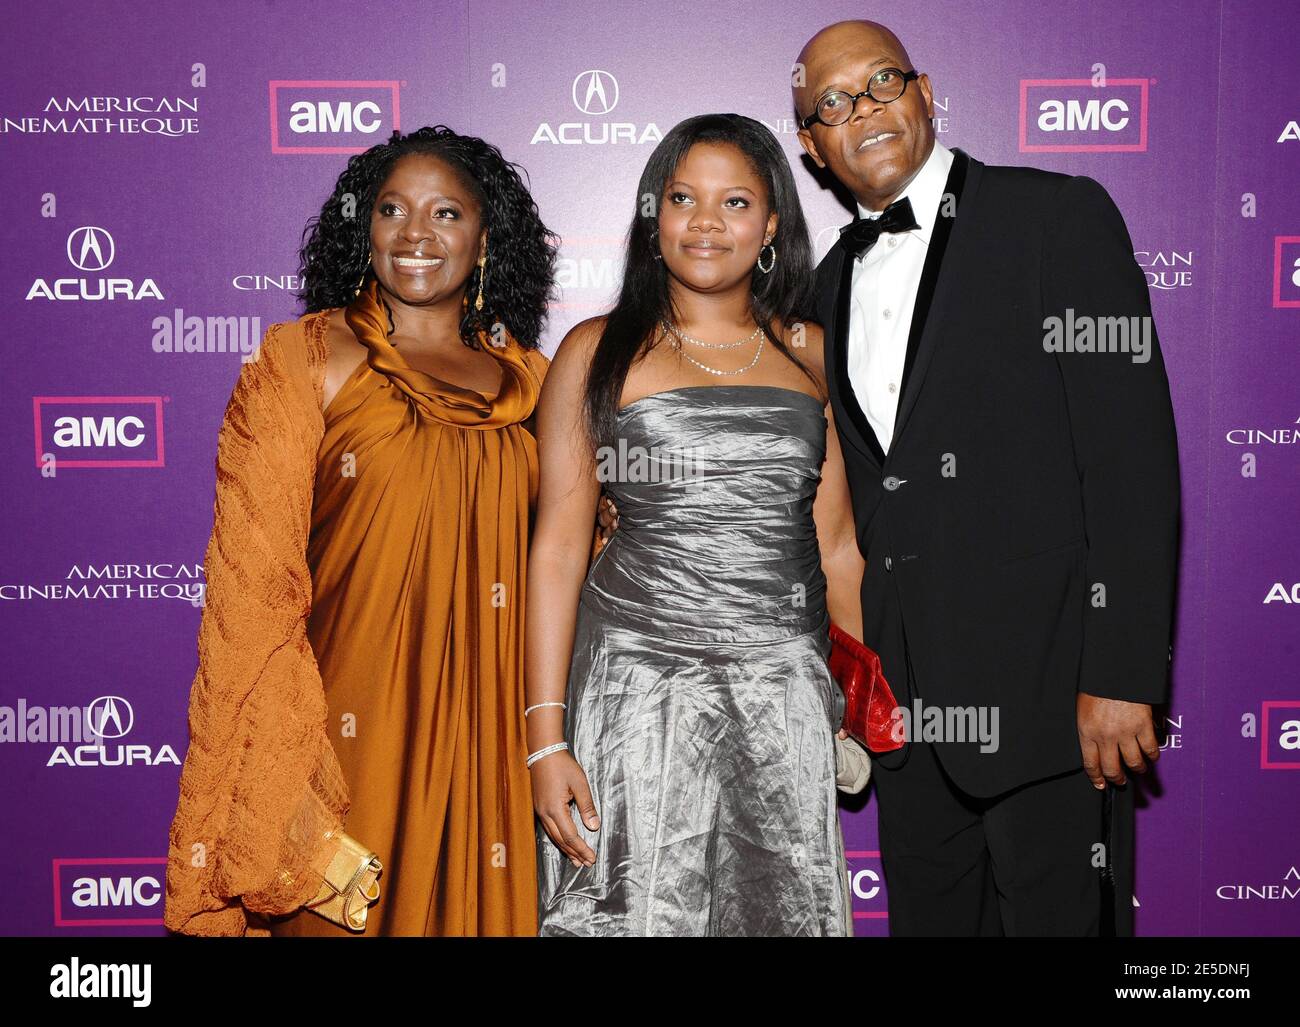 Samuel L. Jackson with wife LaTanya Richardson and daughter Zoe Jackson at the 23rd Annual American Cinematheque Awards, in Los Angeles, CA, USA on December 1, 2008. Photo by Lionel Hahn/ABACAUSA.COM Stock Photo